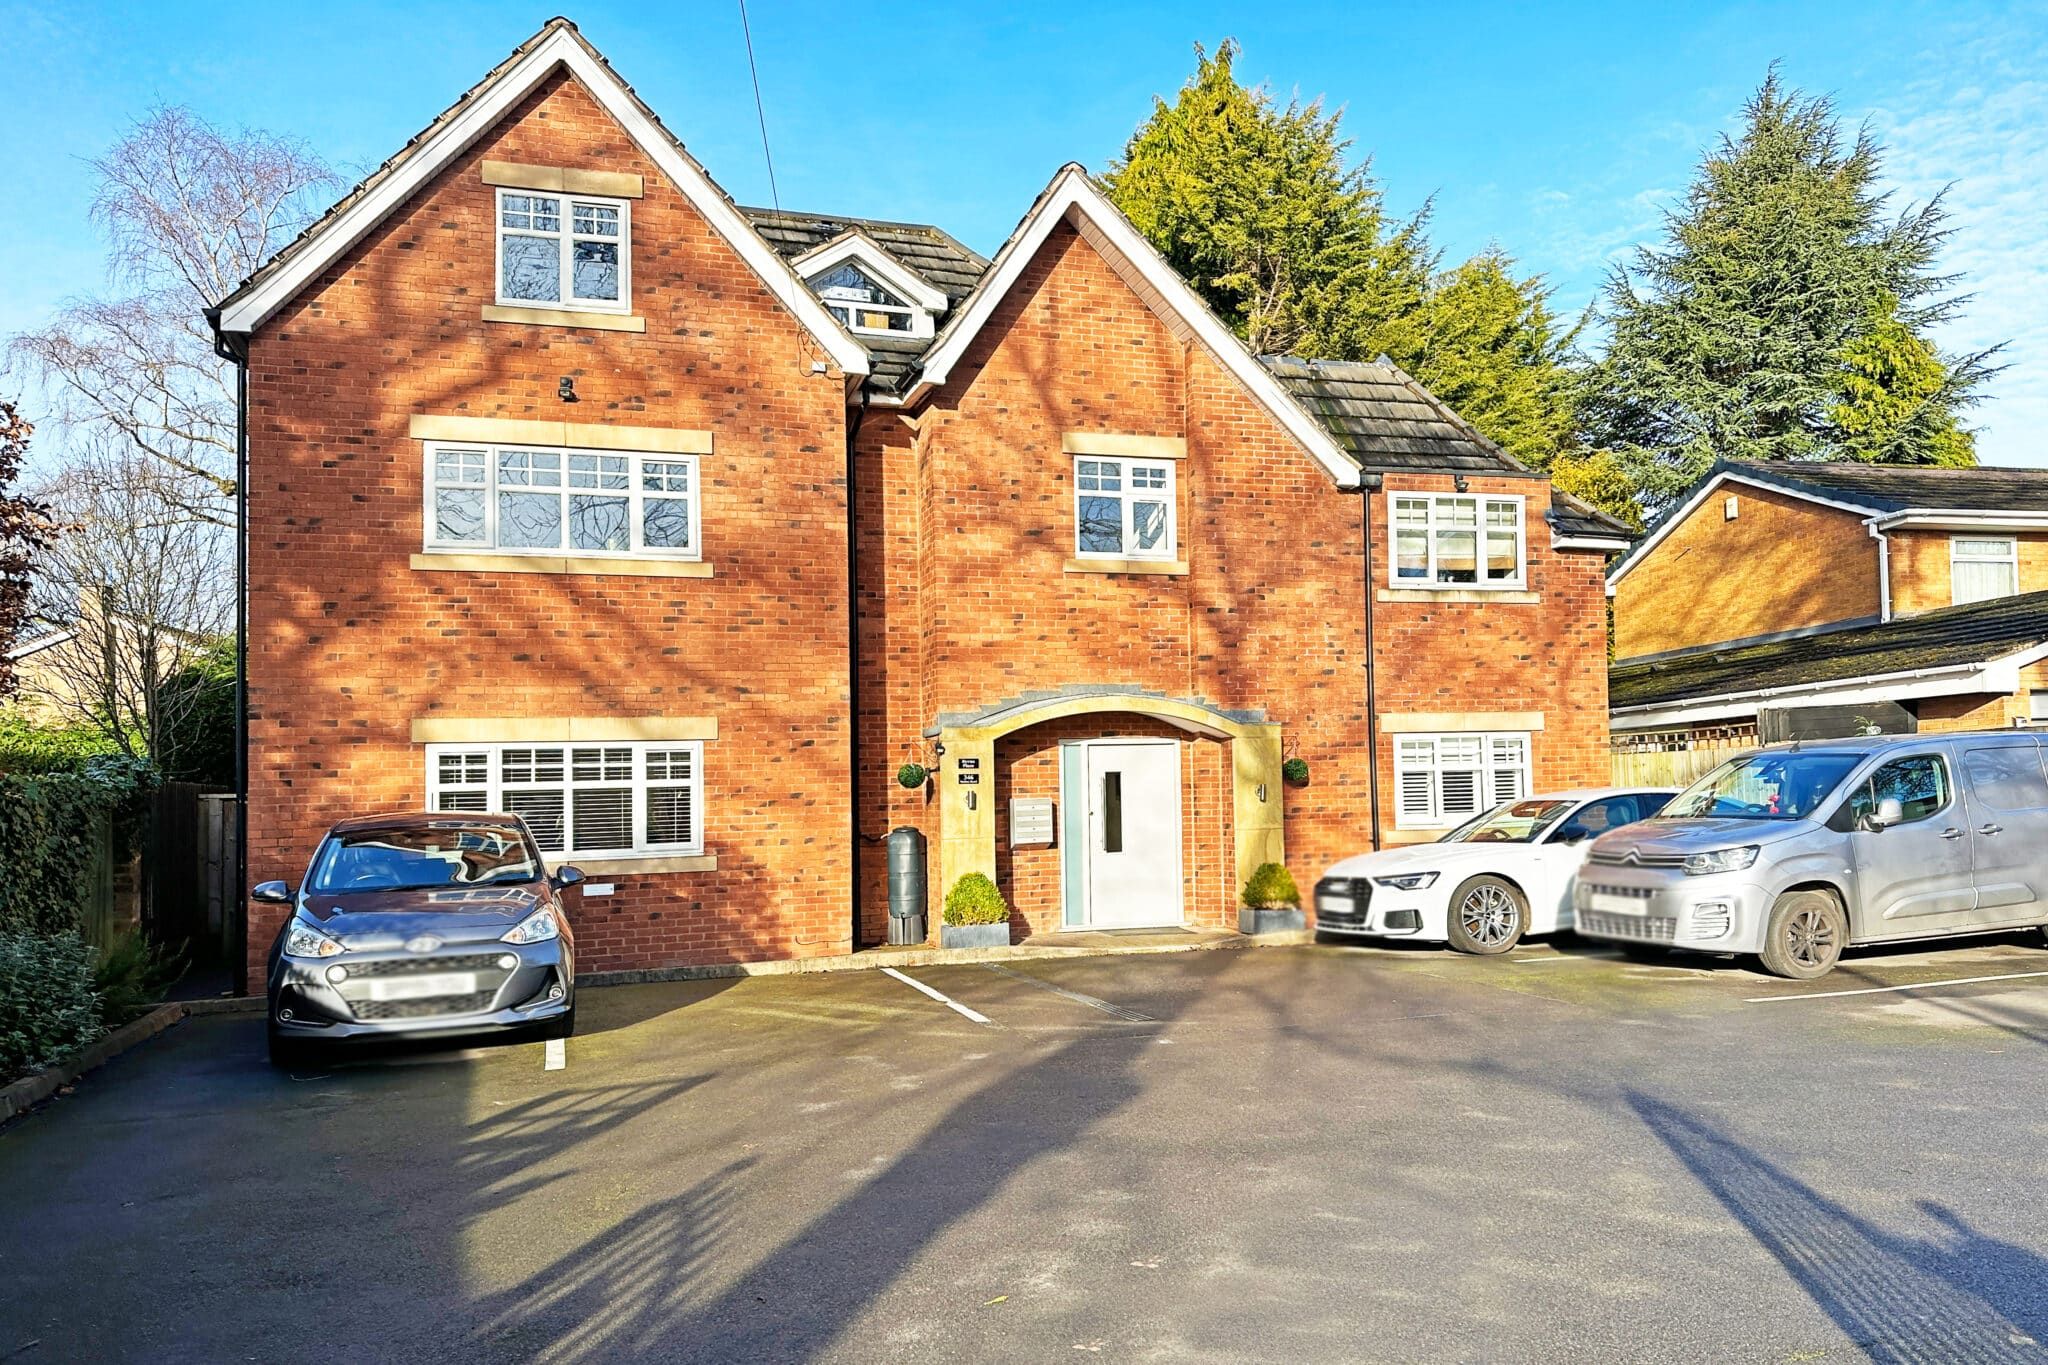 Apartment 2, Byron Place, Solihull, 346 Station Road, B93 0ET